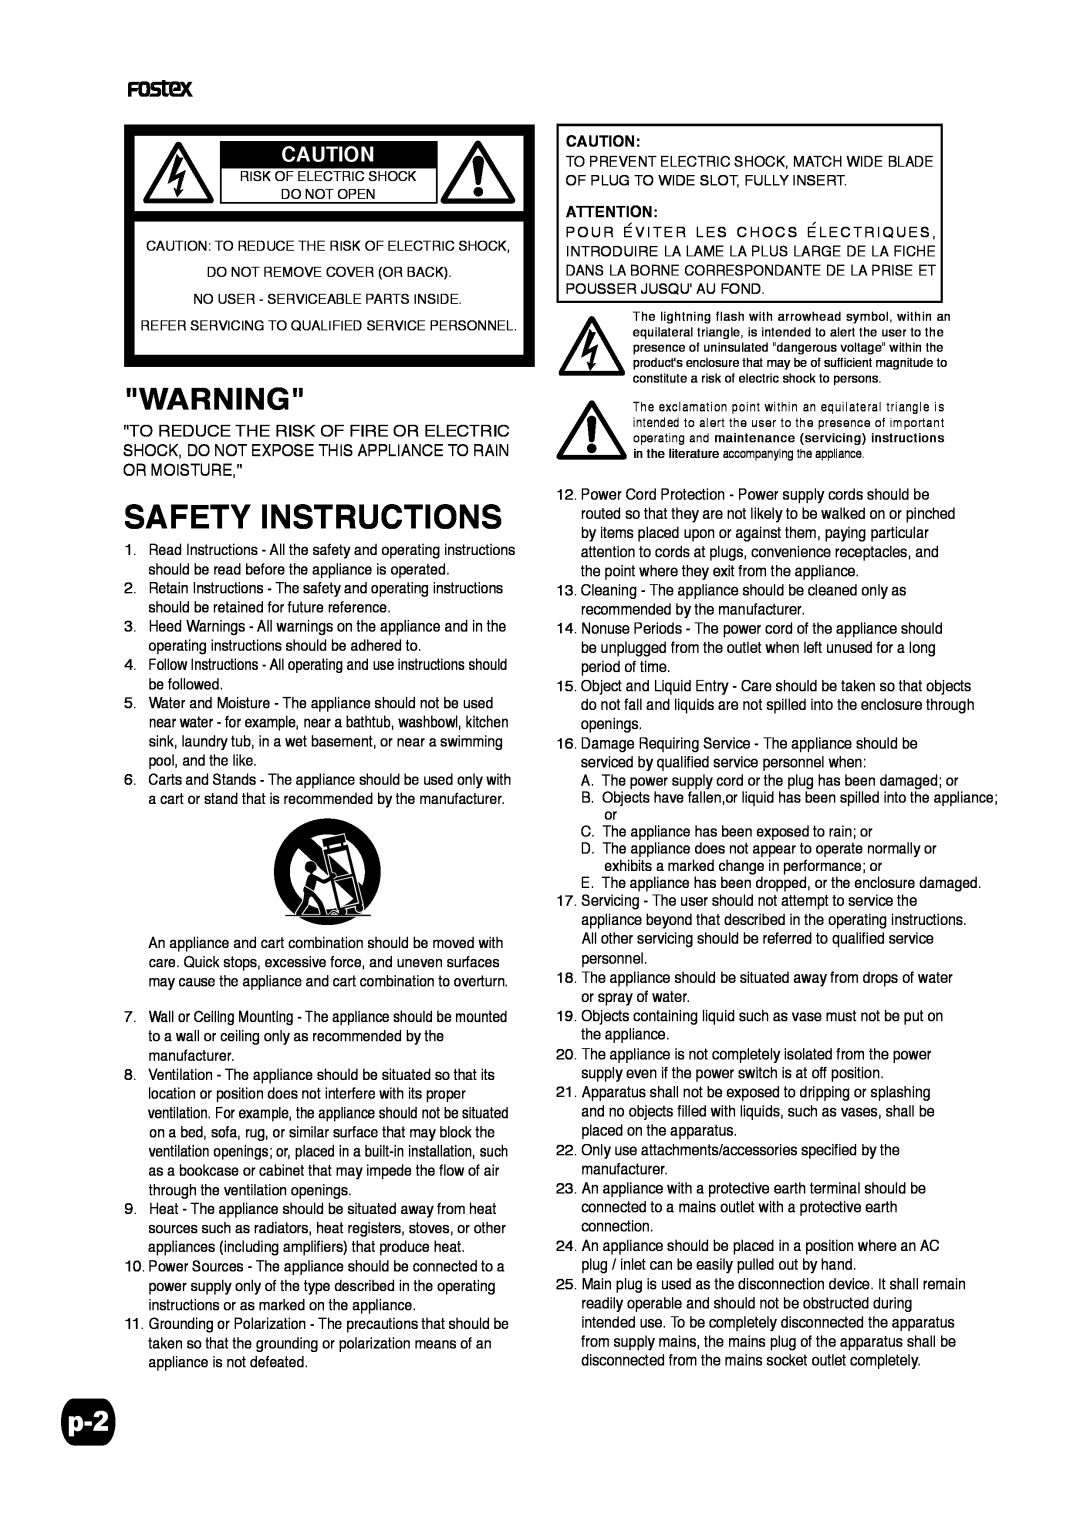 Fostex PM-1MKII specifications Safety Instructions 